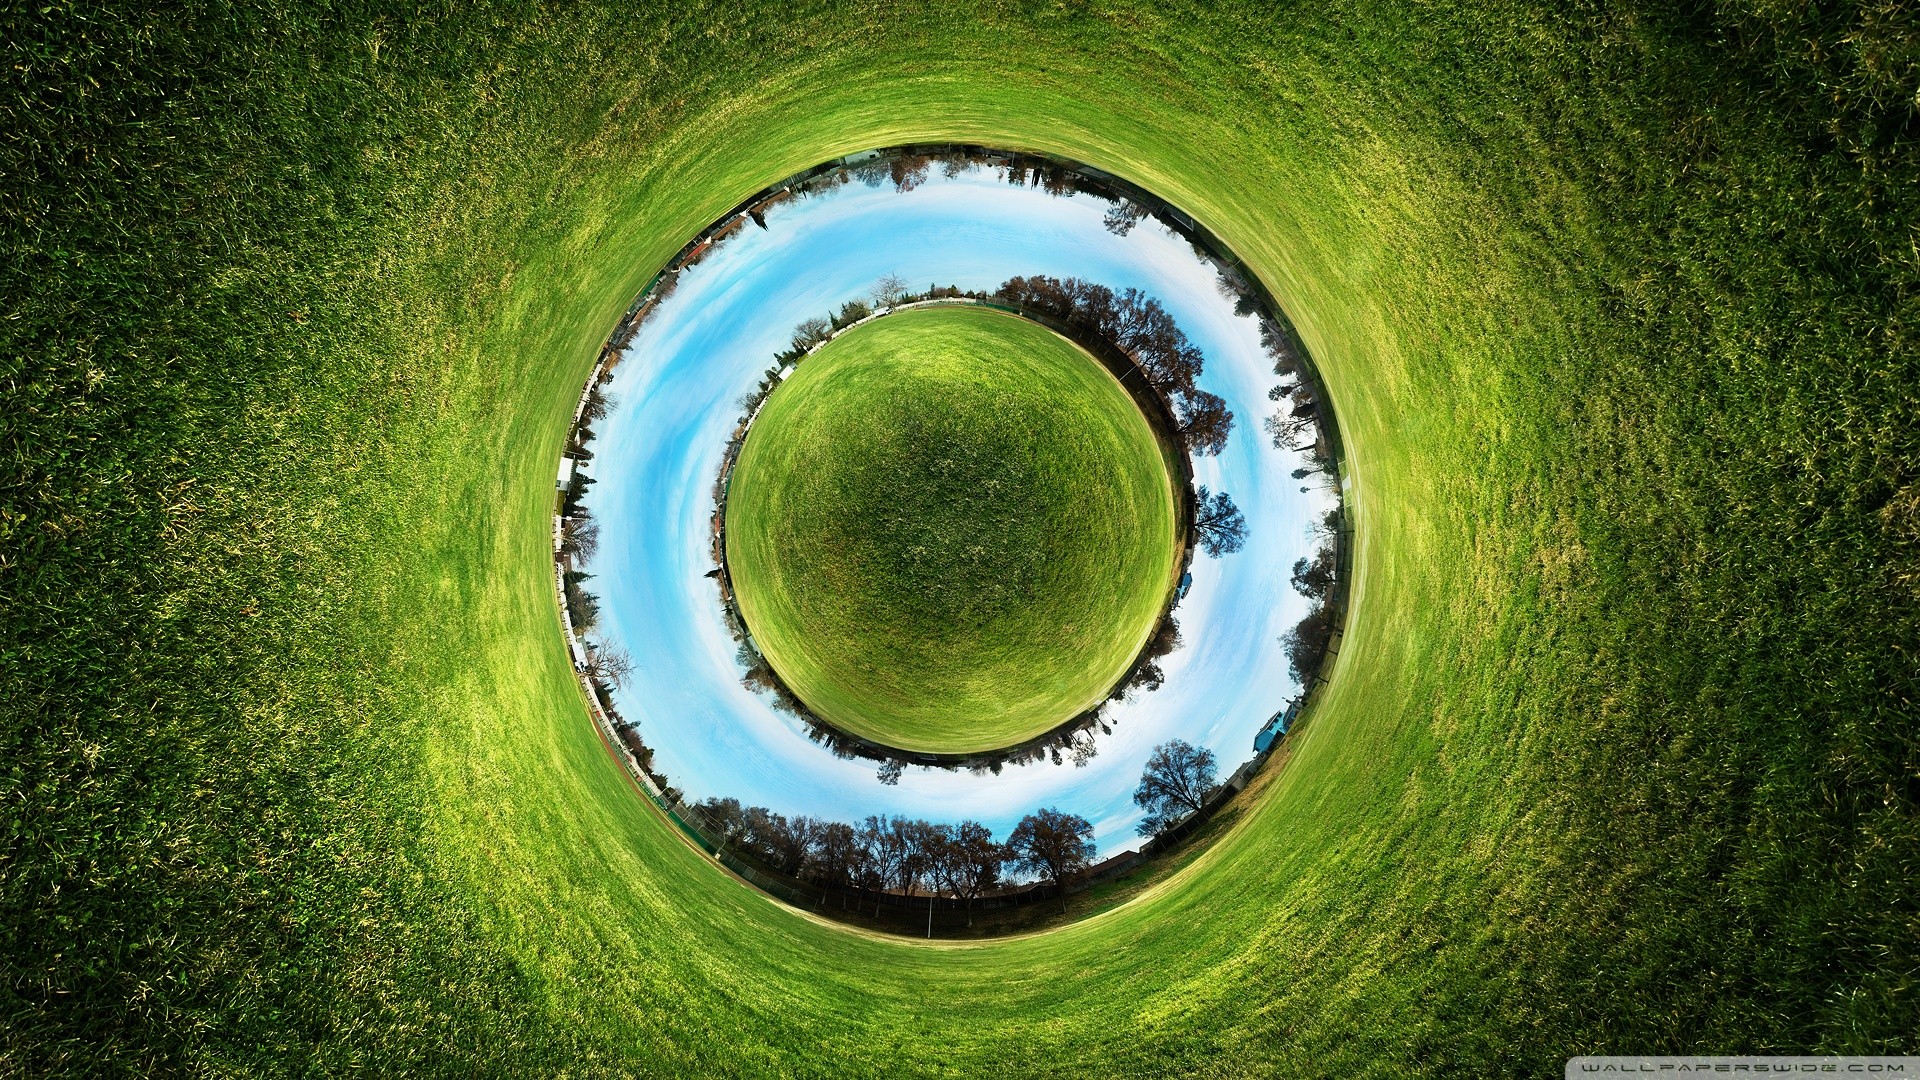 General 1920x1080 panoramic sphere nature circle abstract grass digital art watermarked